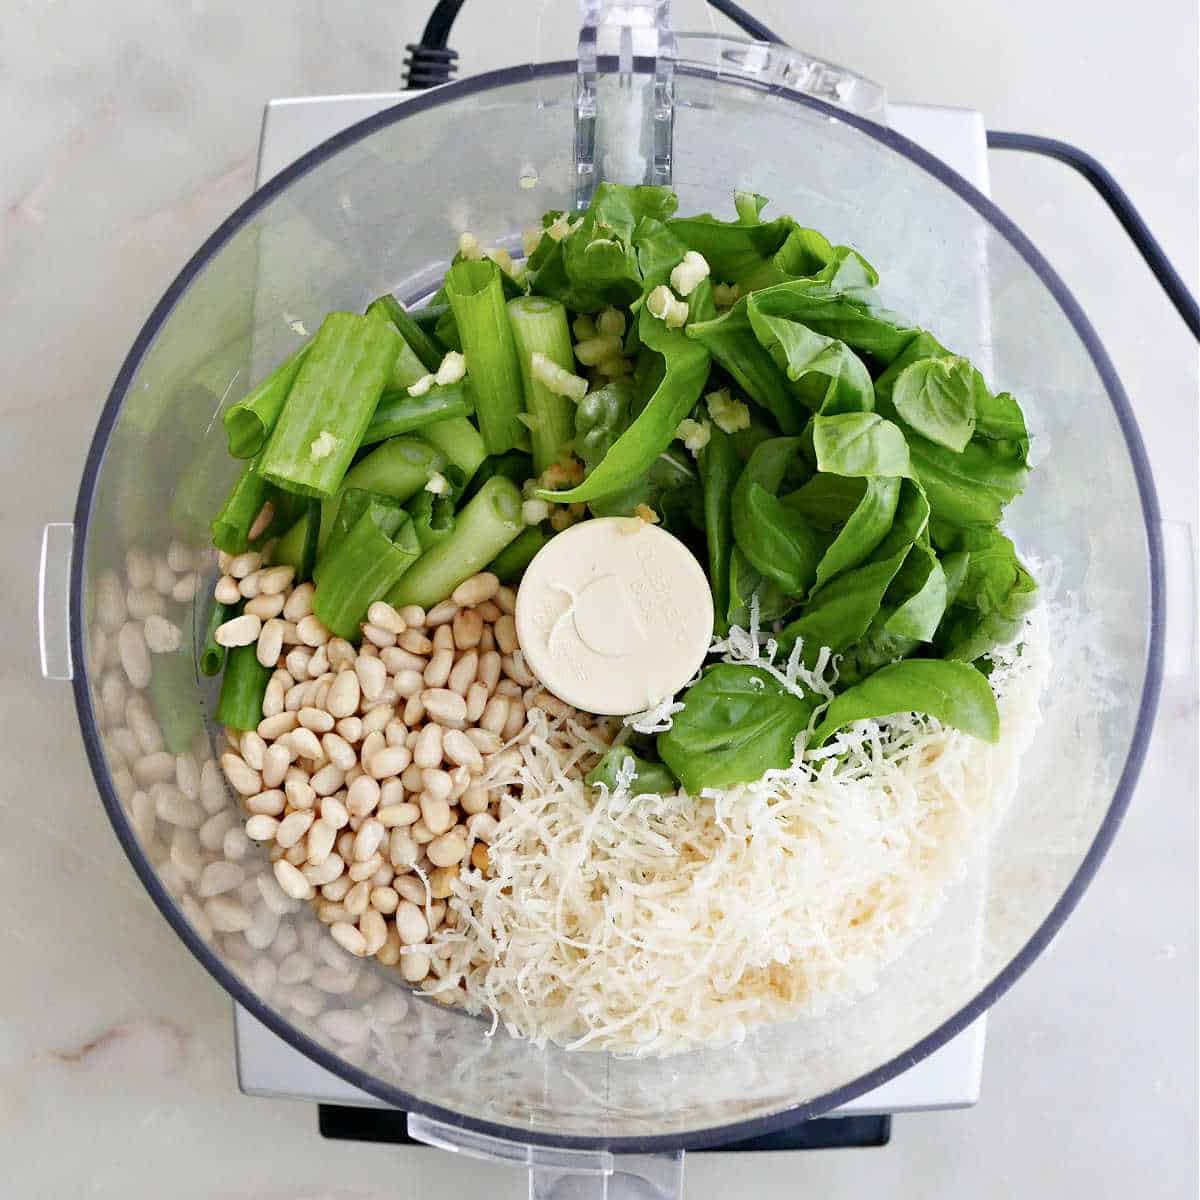 ingredients for scallion pesto in a food processor before being blended